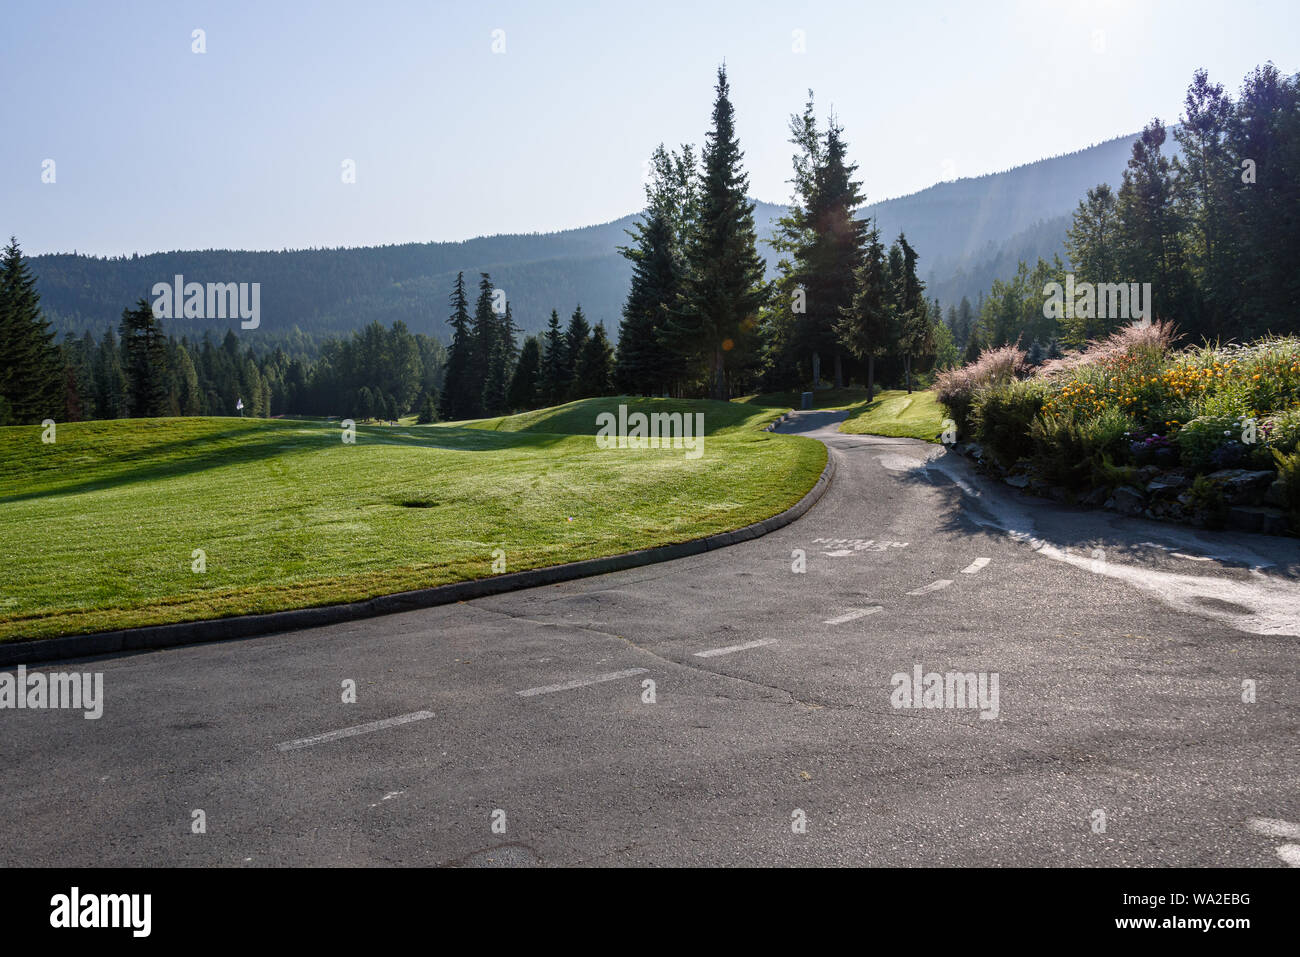 WHISTLER, BC/CANADA – AUGUST 3, 2019: Fairmont Chateau Whistler Golf Club early morning at holes 1 and 18. Stock Photo